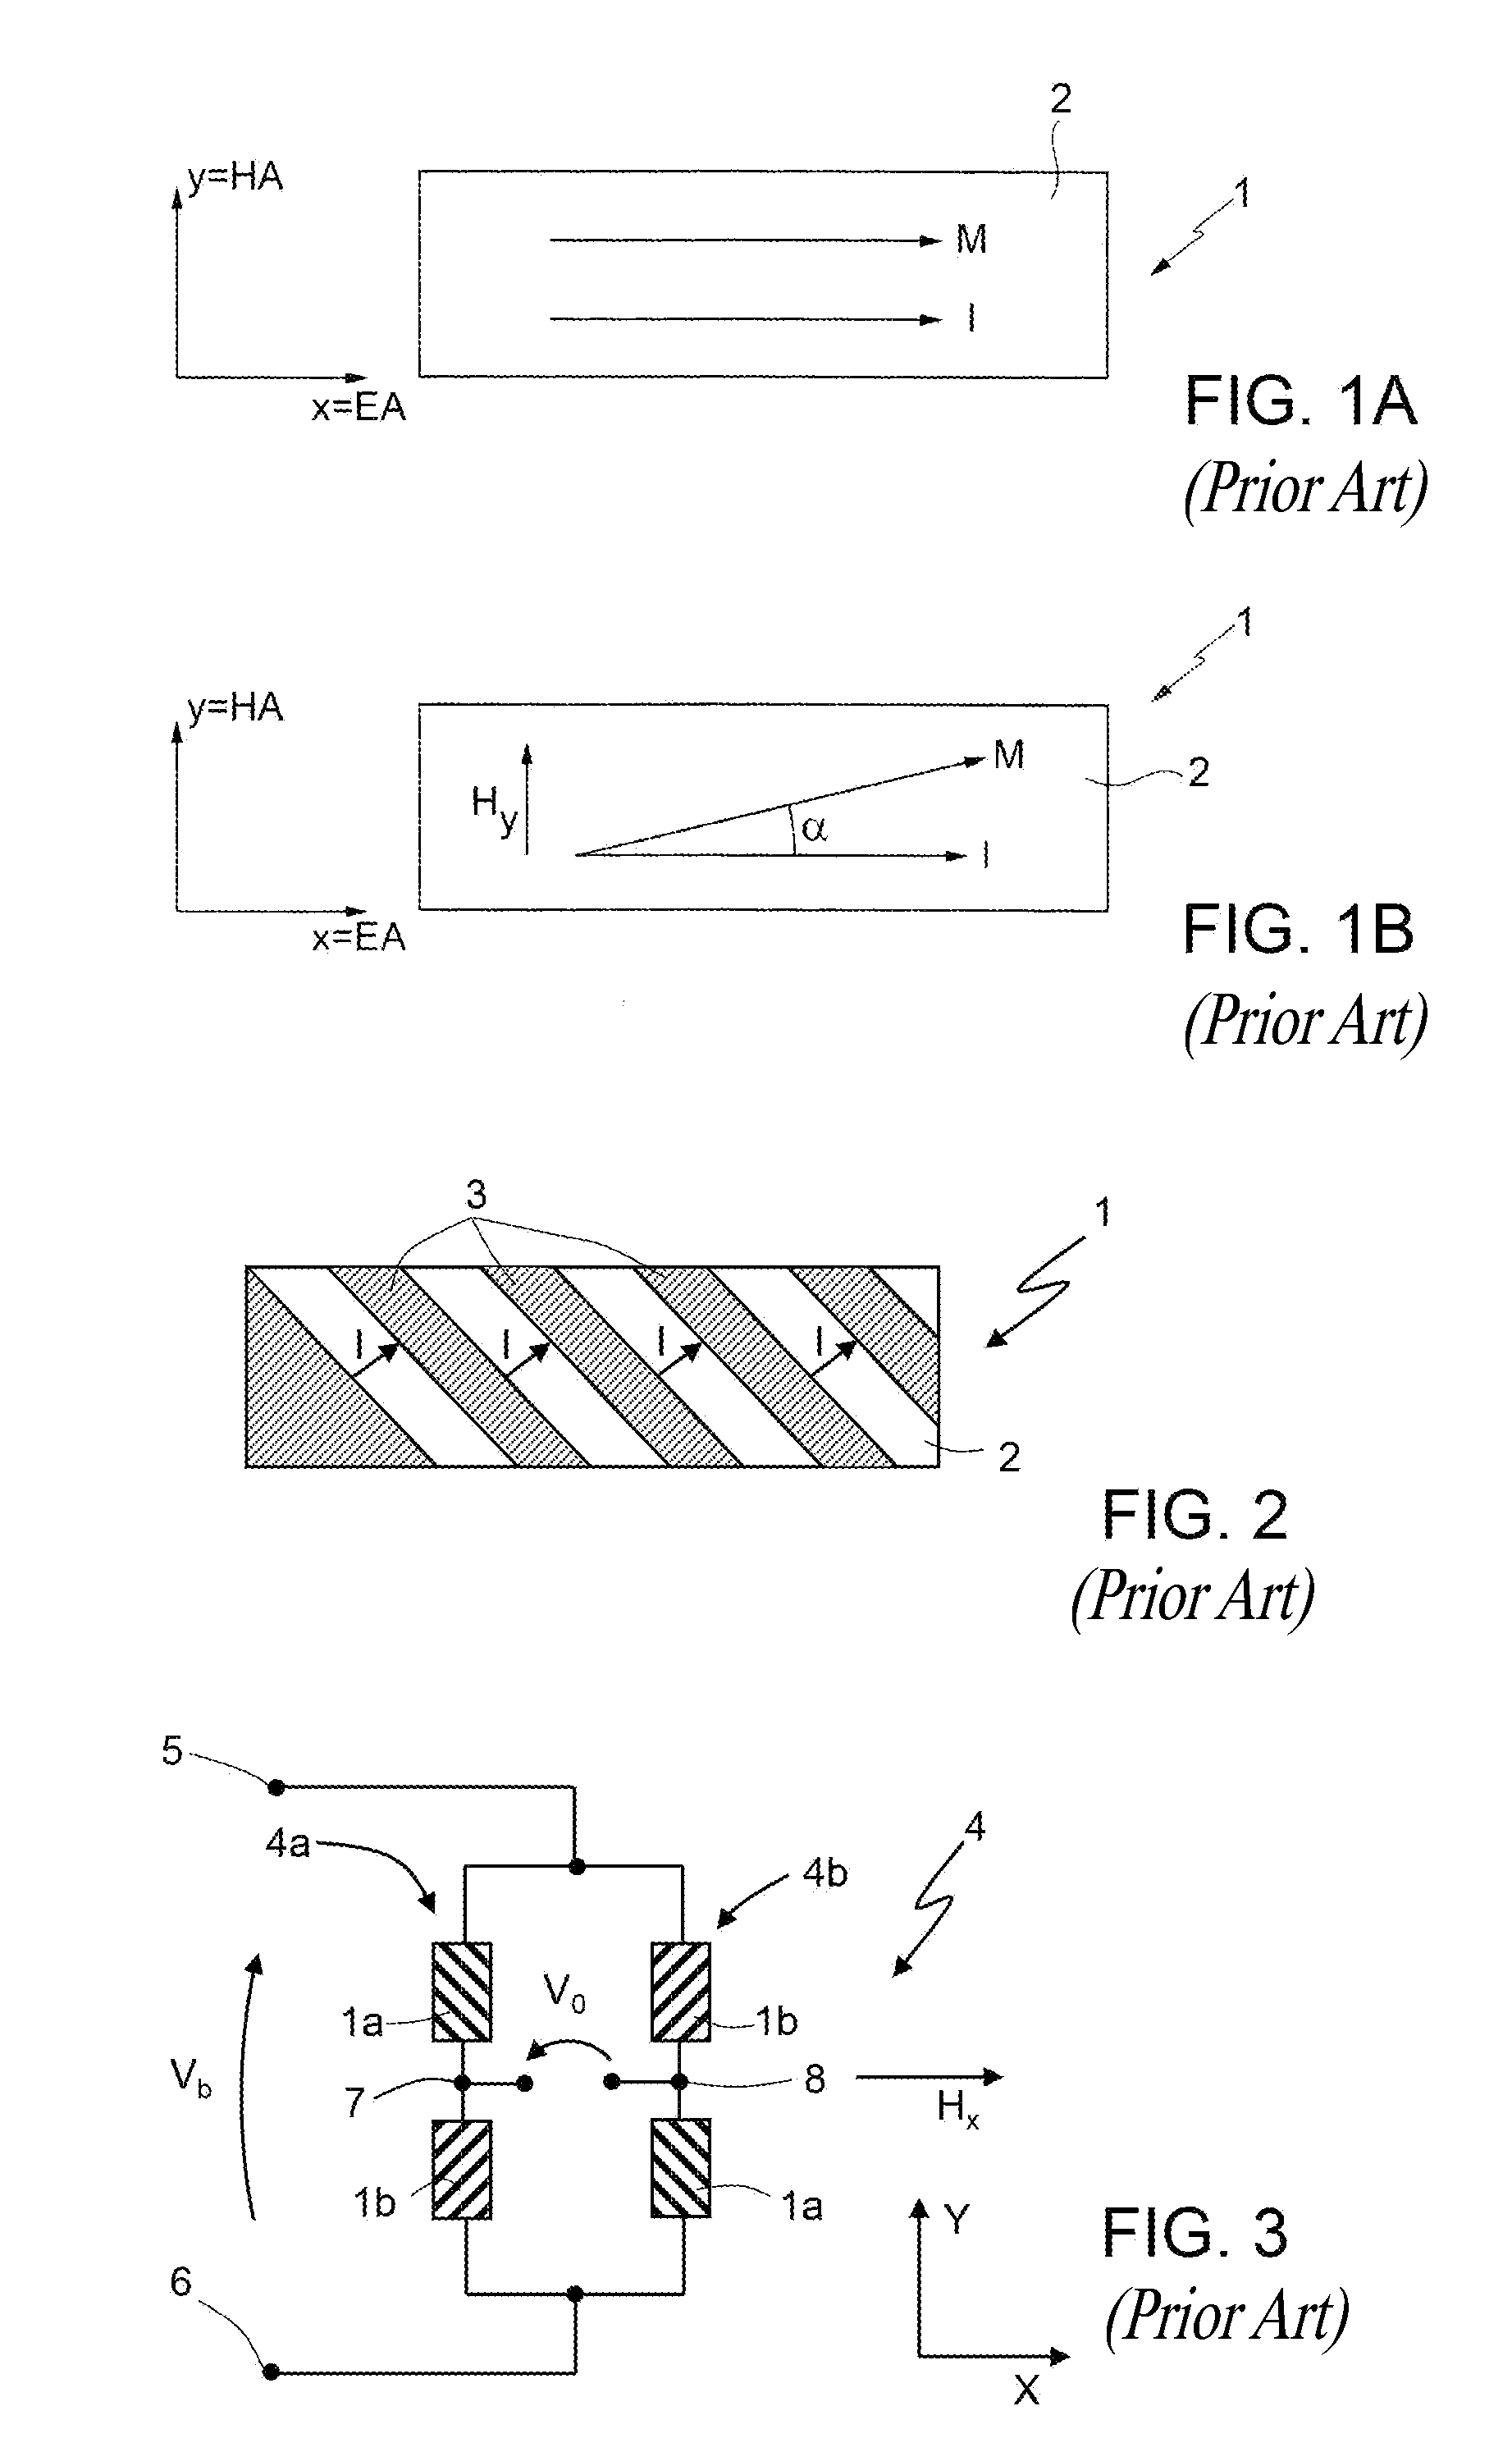 Amr-type integrated magnetoresistive sensor for detecting magnetic fields perpendicular to the chip